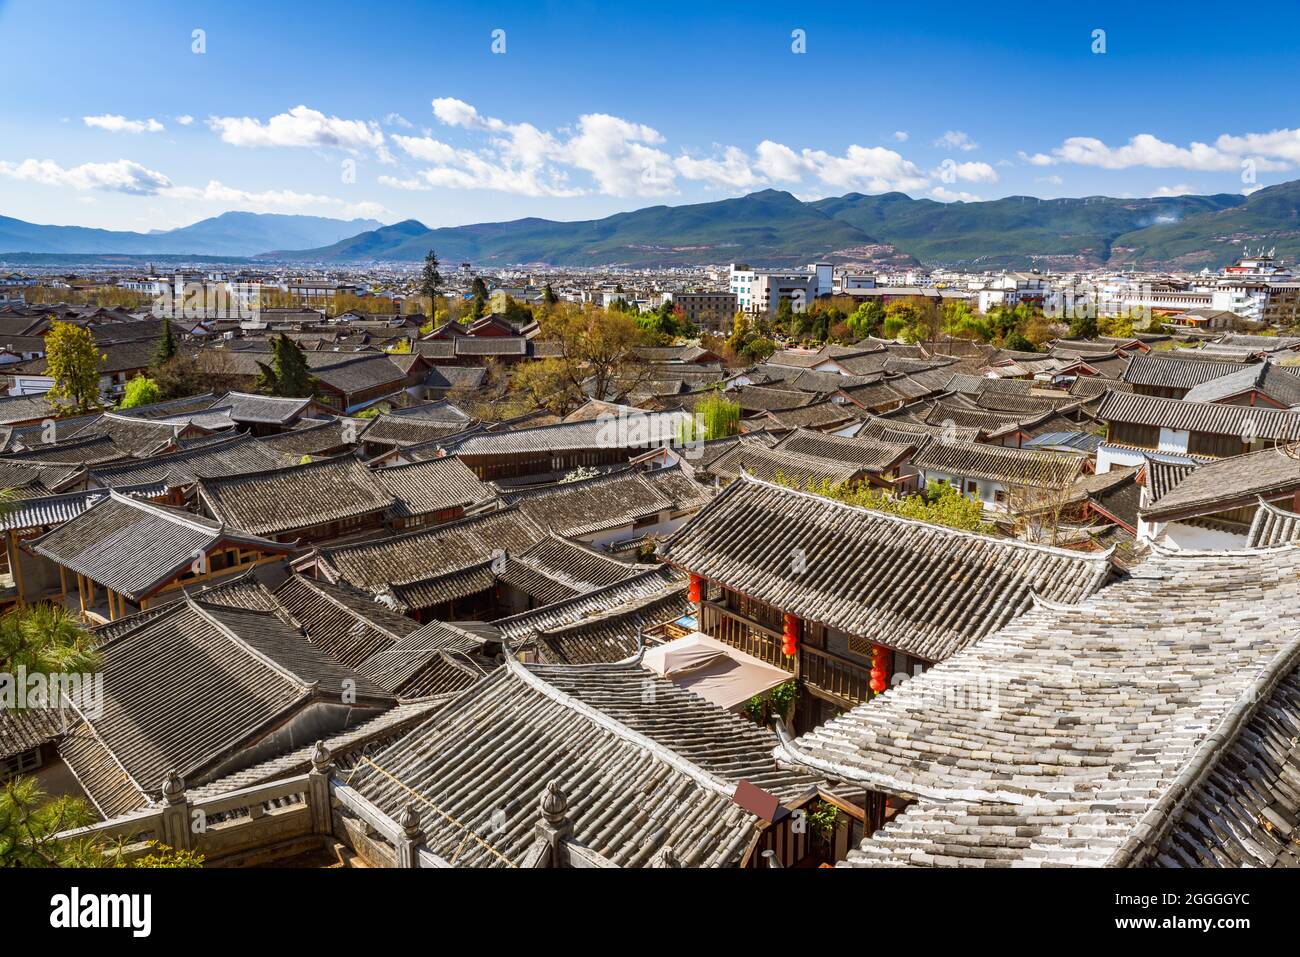 Beautiful cityscape of Lijiang ancient town with view of tiled roofs of ancient shophouses, Yunan, China. Stock Photo